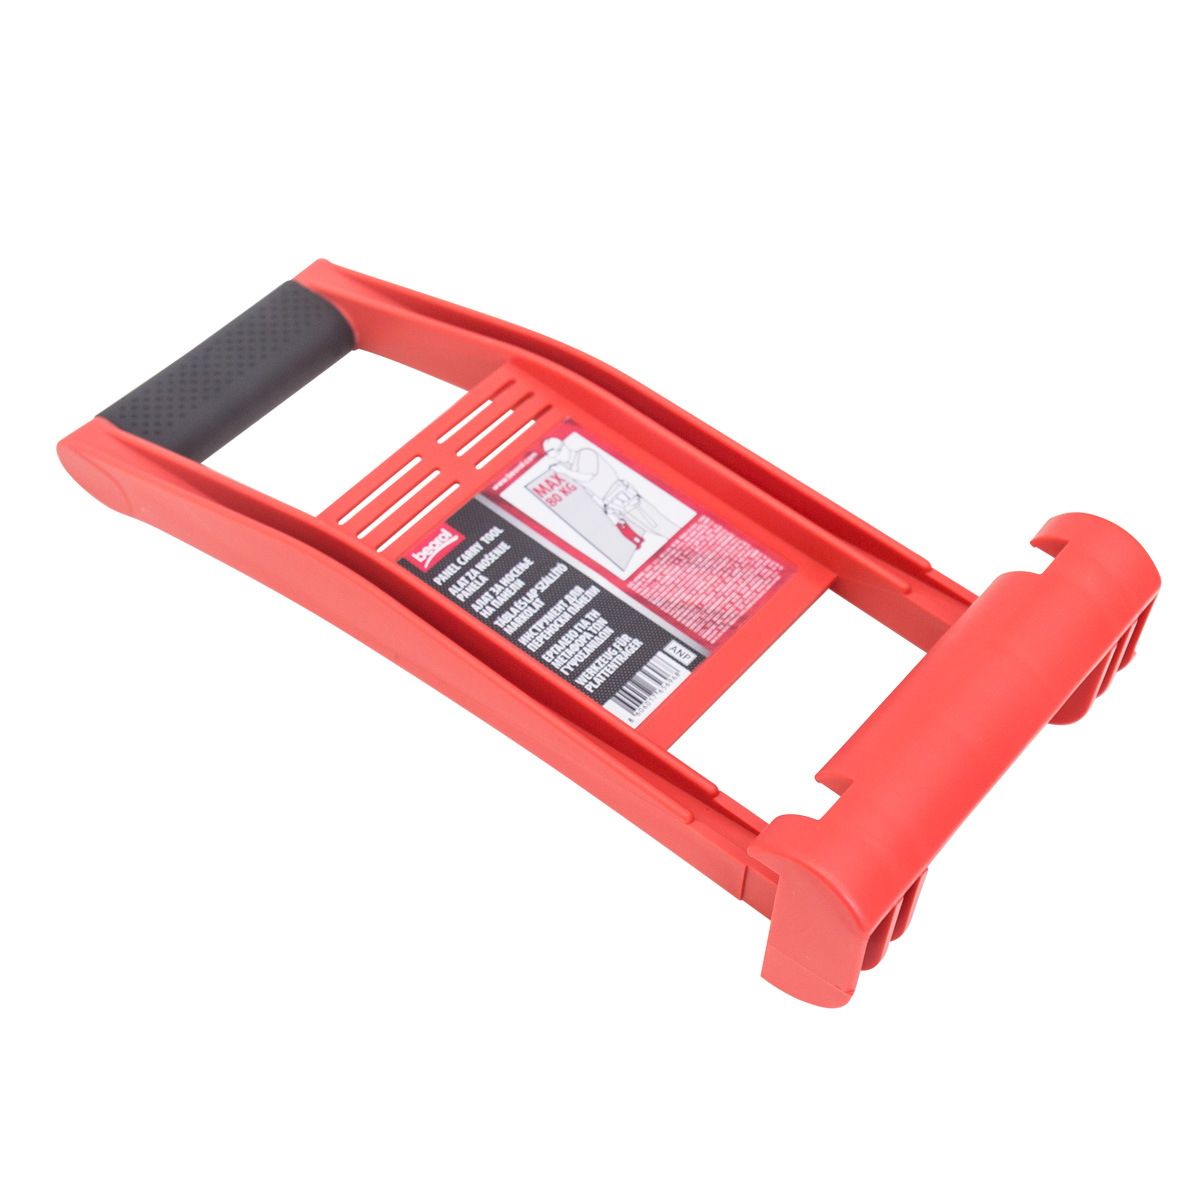 Tool for carrying plate materials 